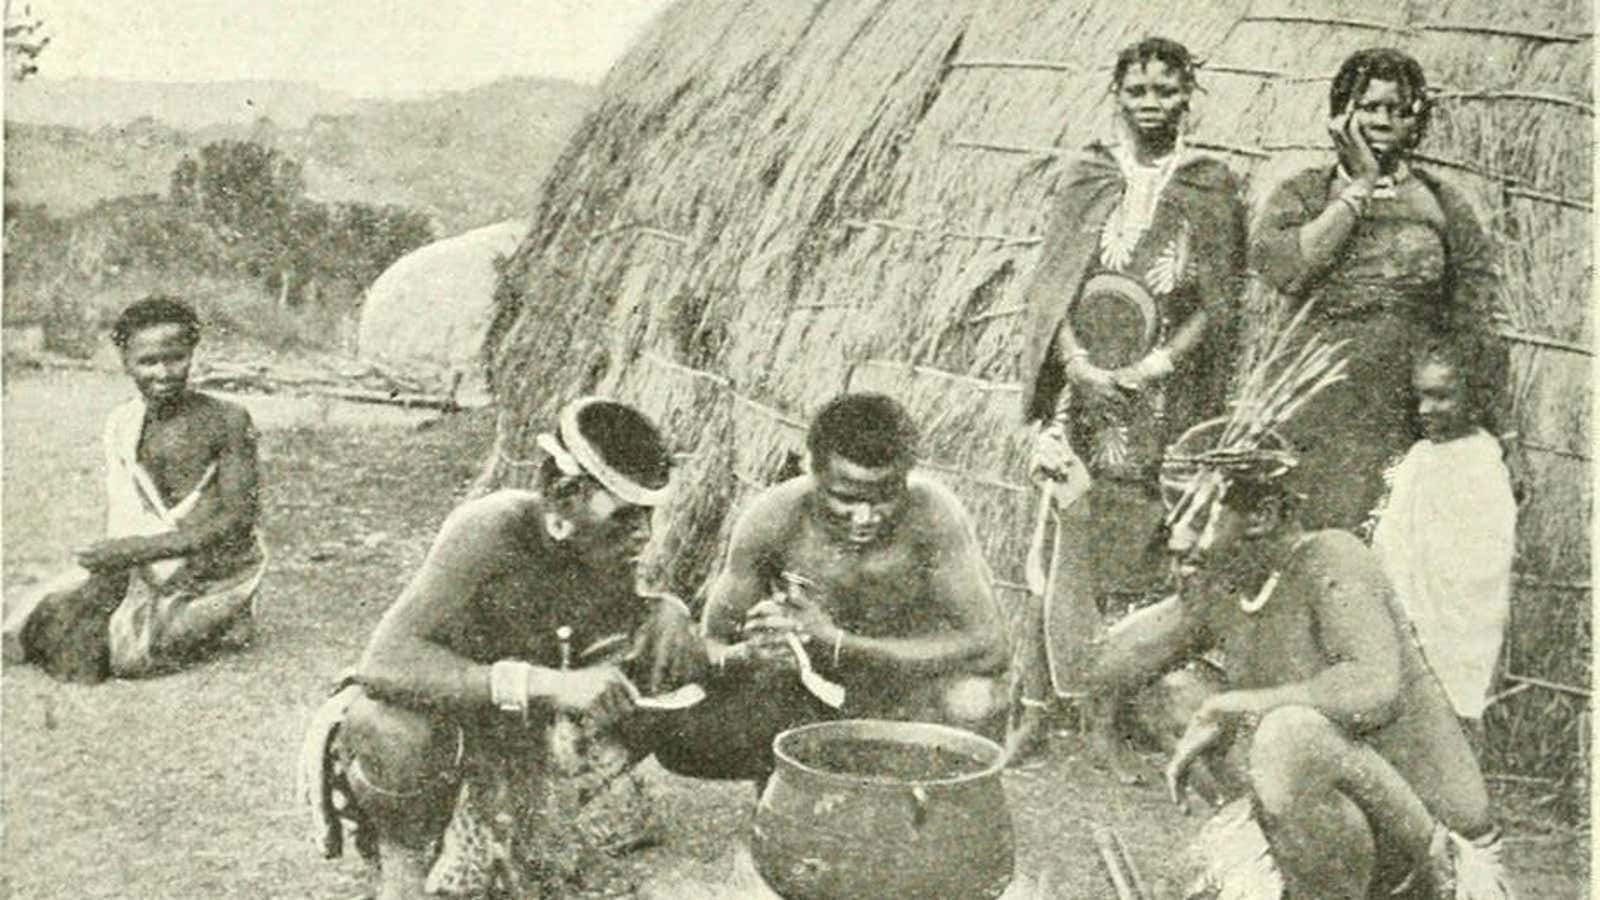 A Zulu household, from an 1895 book called The Colony of Natal: An Official Illustrated Handbook and Railway Guide.